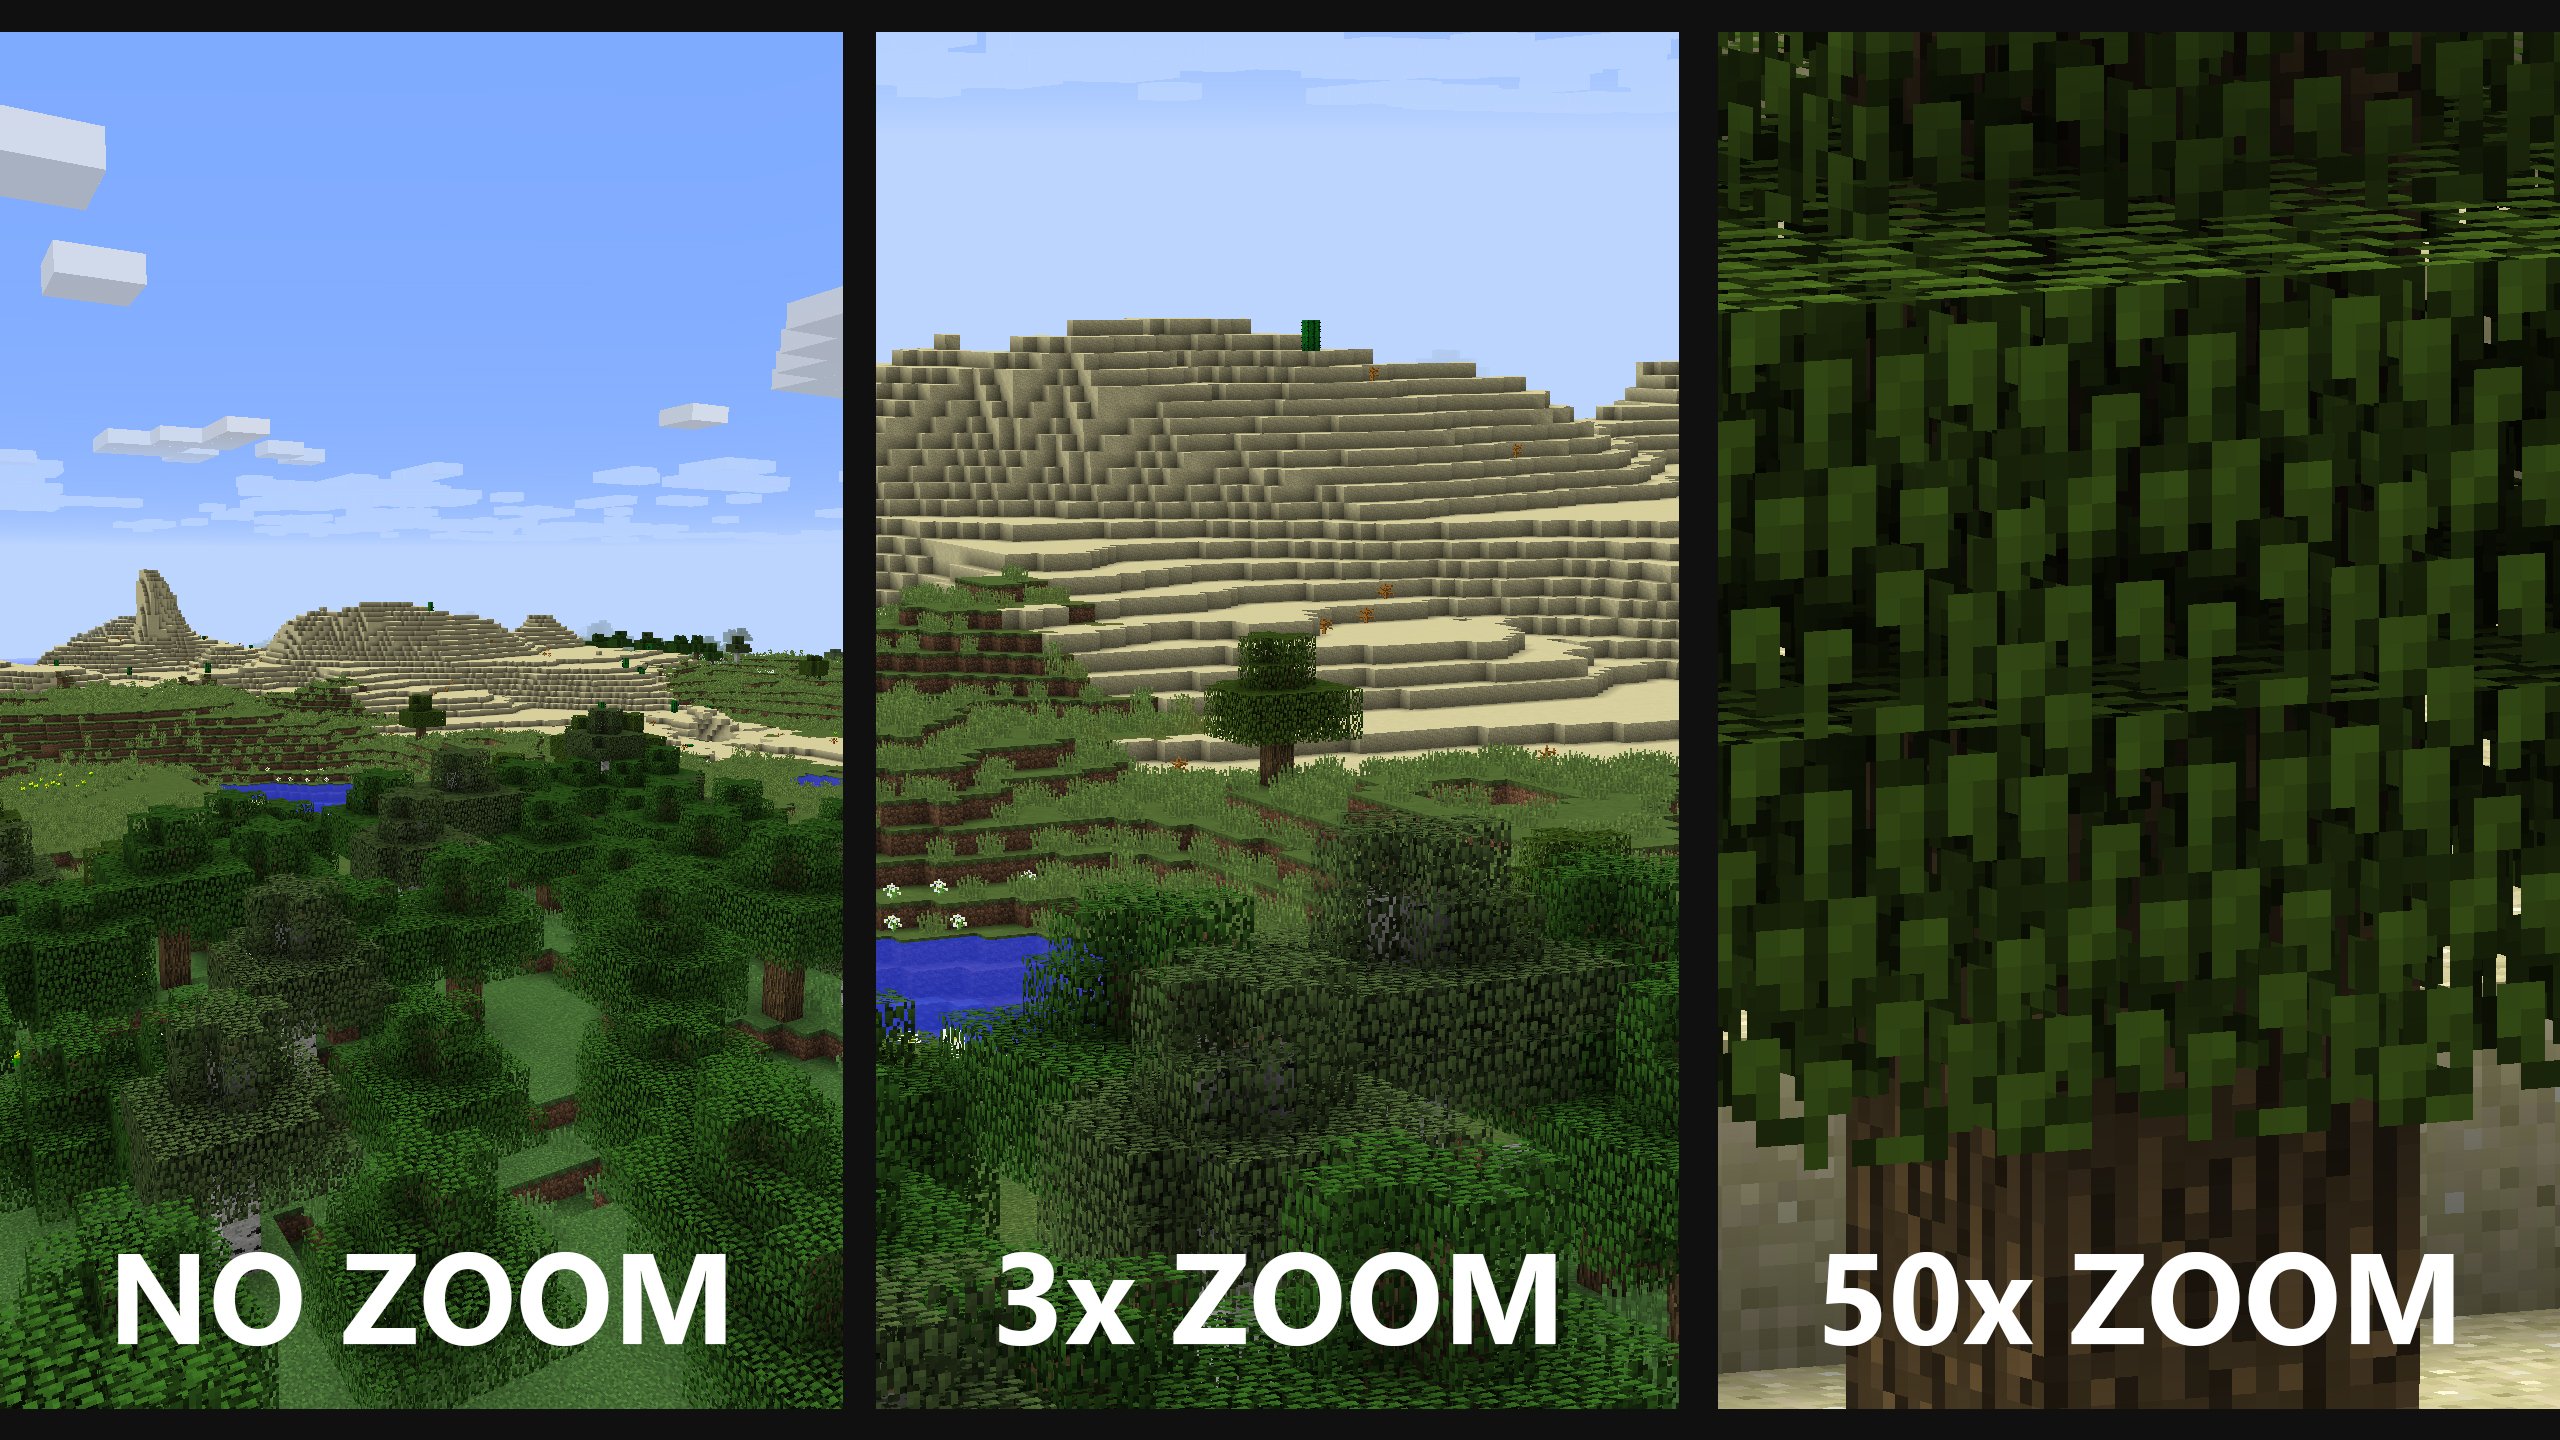 A comparison of no zoom, 3x zoom, and 50x zoom.